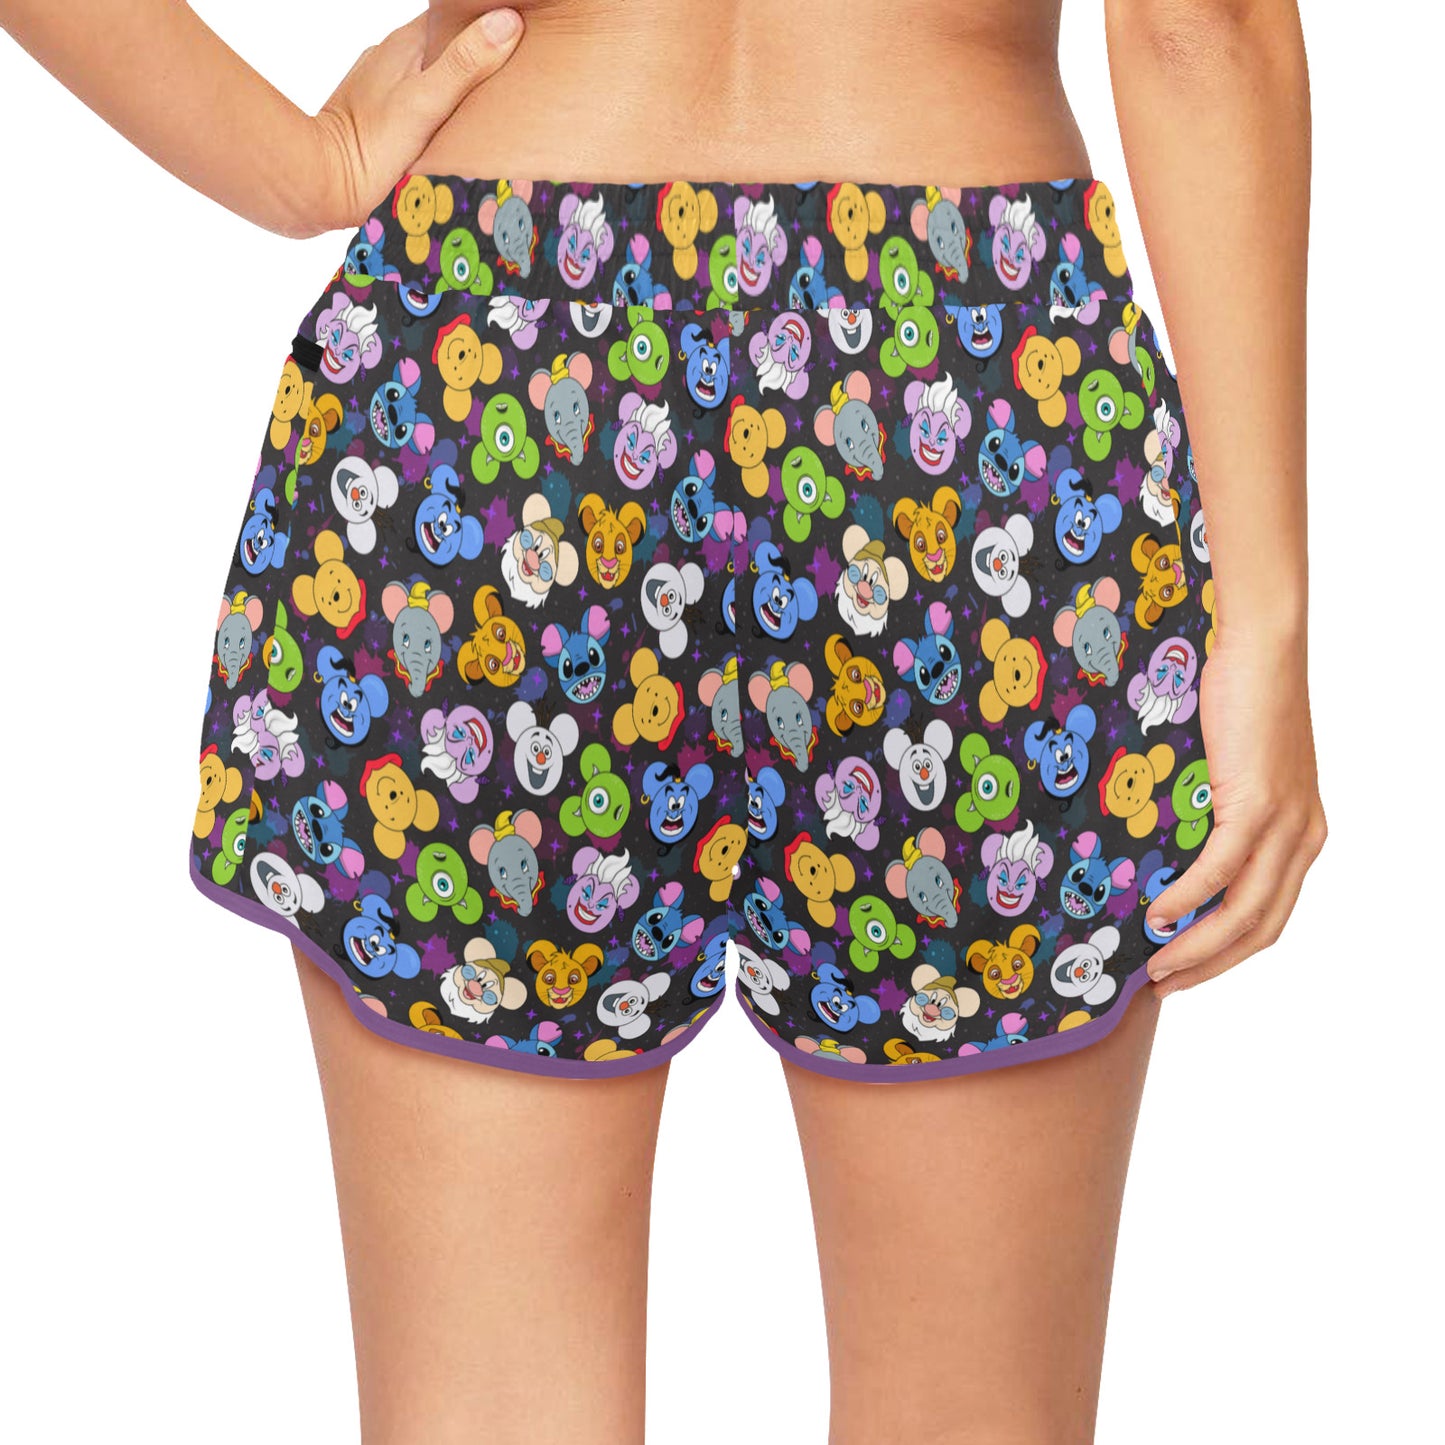 The Magical Gang Women's Athletic Sports Shorts